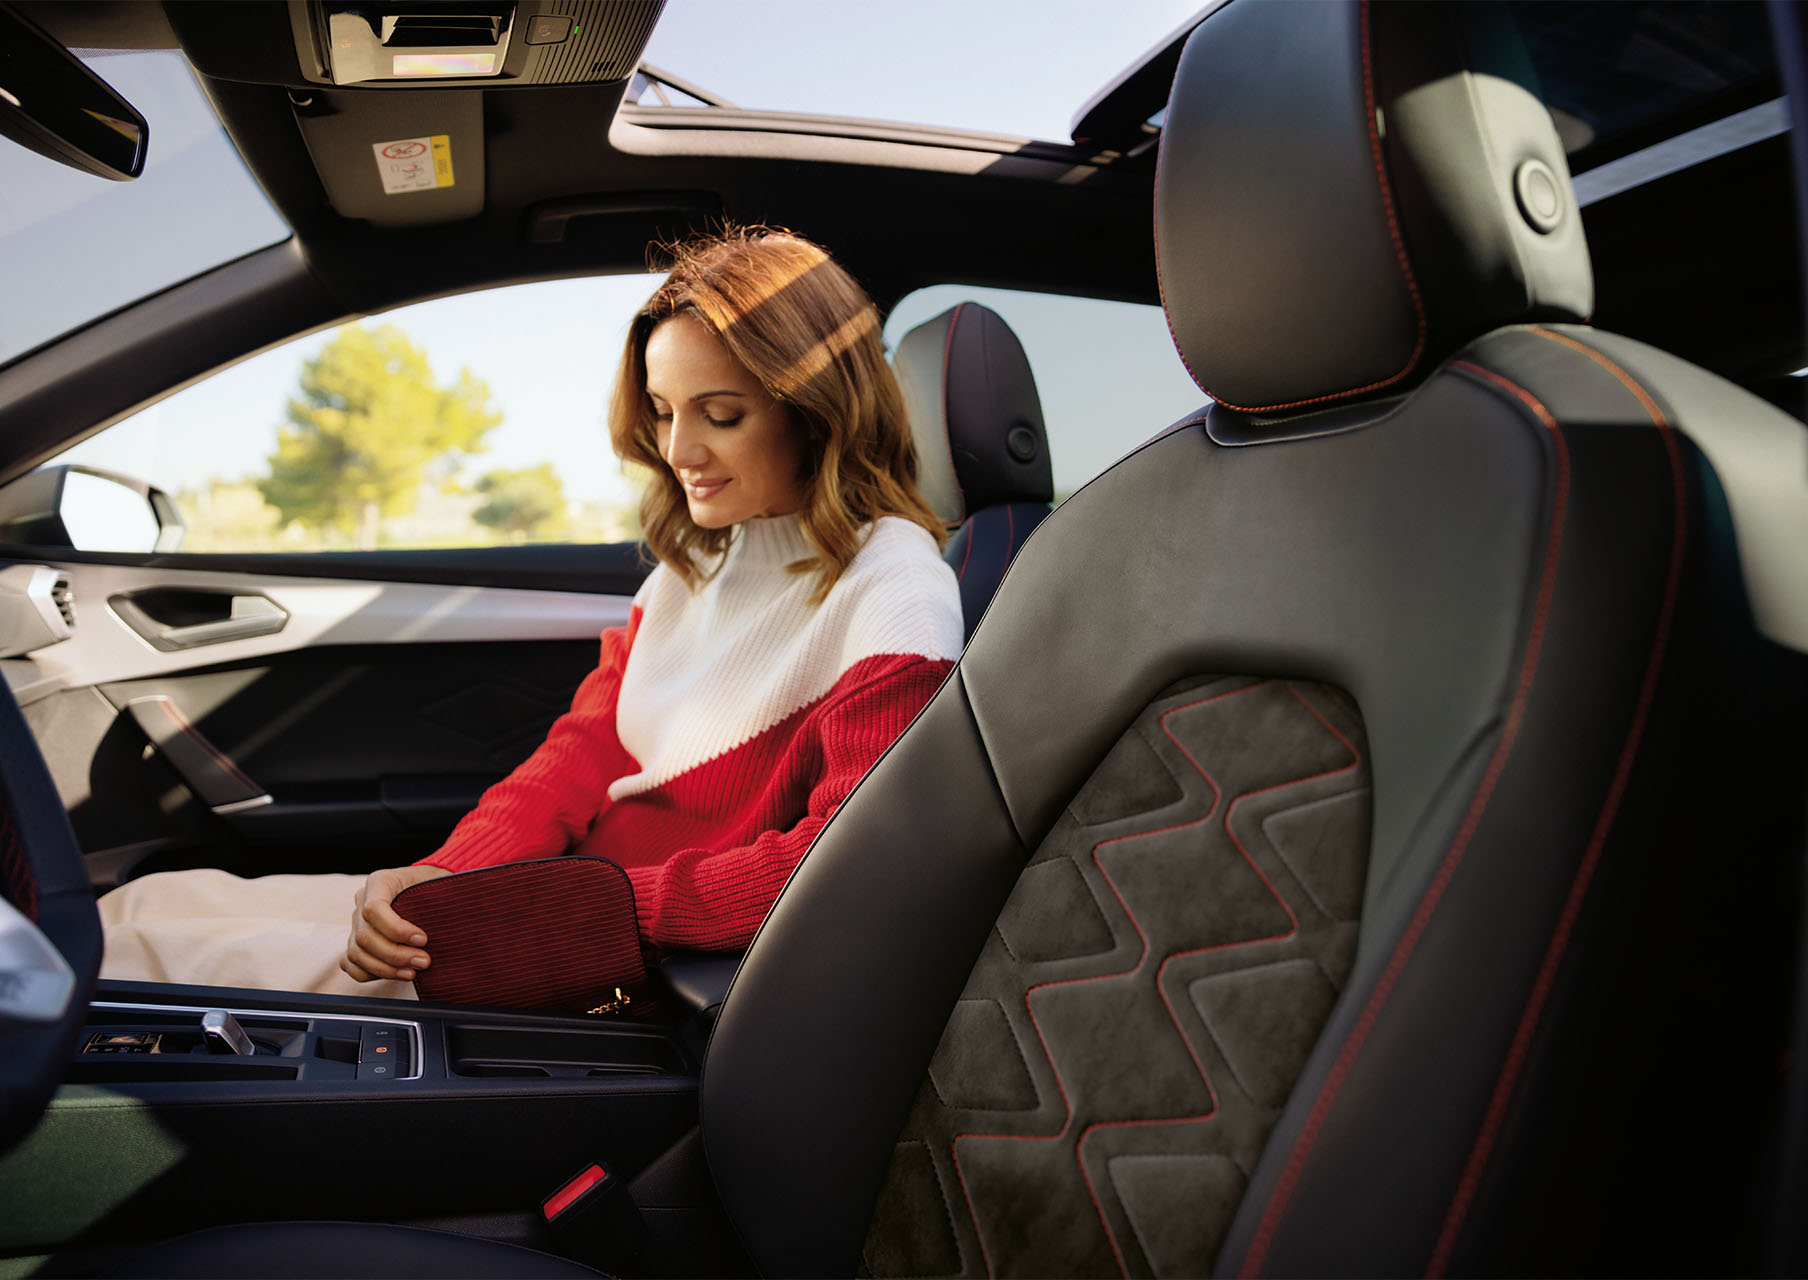 A woman seated inside a SEAT Leon 5D FR, showcasing the car's interior design. The interior features ergonomic seats with red stitching, a sleek dashboard and an advanced infotainment system. The sunroof allows natural light to fill the cabin, highlighting the car's comfortable environment.